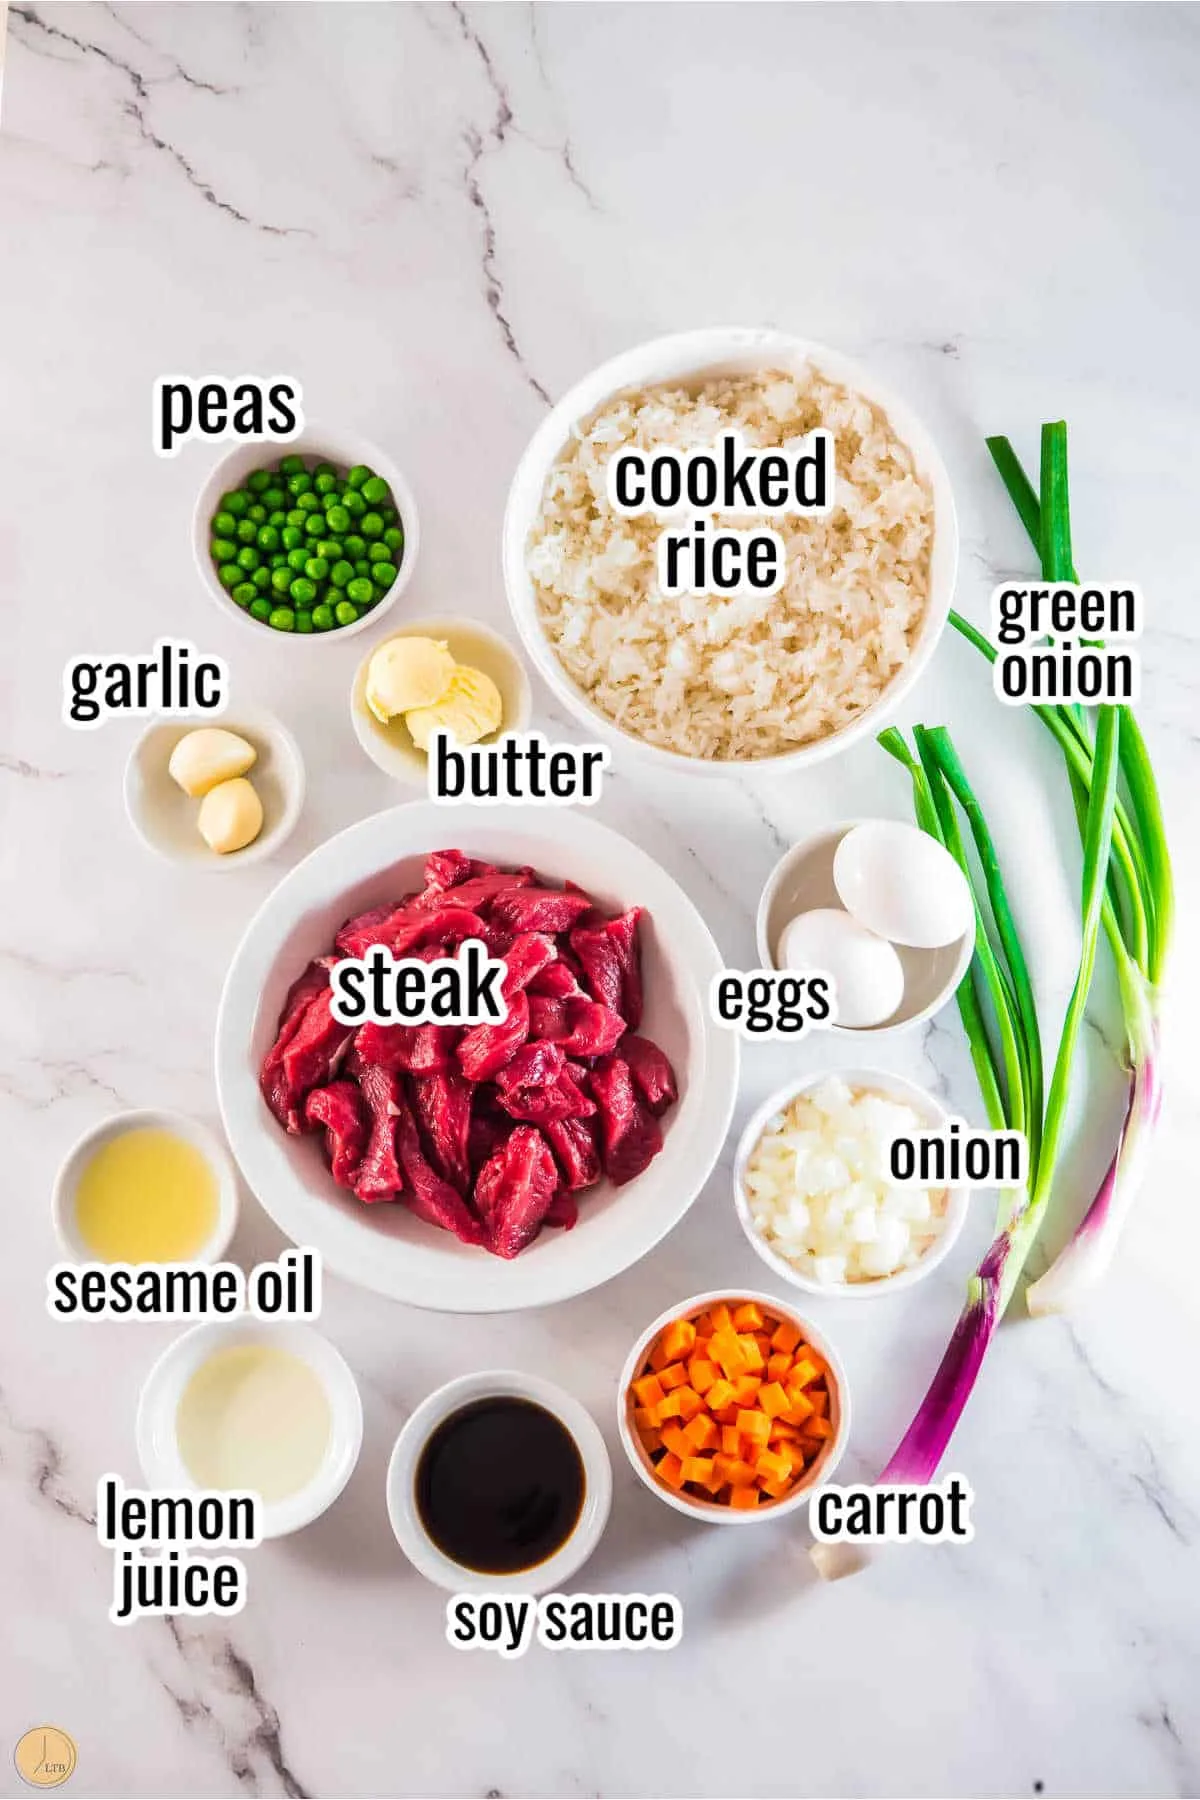 rest of the ingredients for beef fried rice recipe